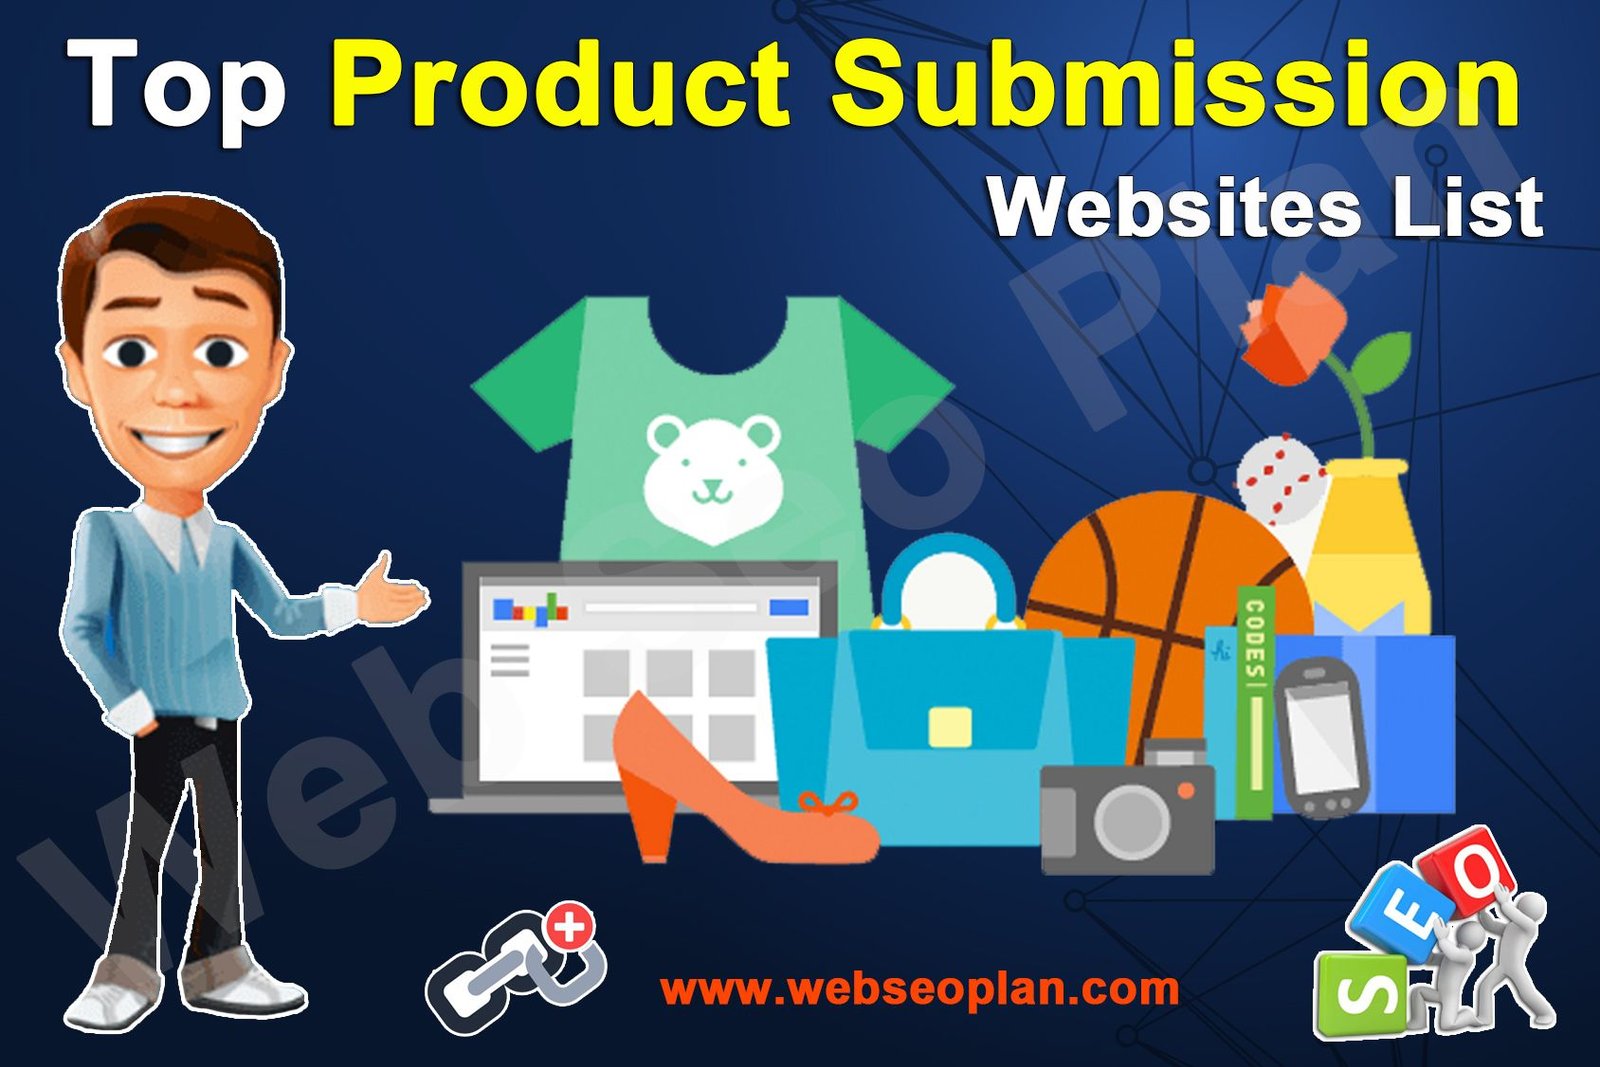 Top Product Submission Site Lists